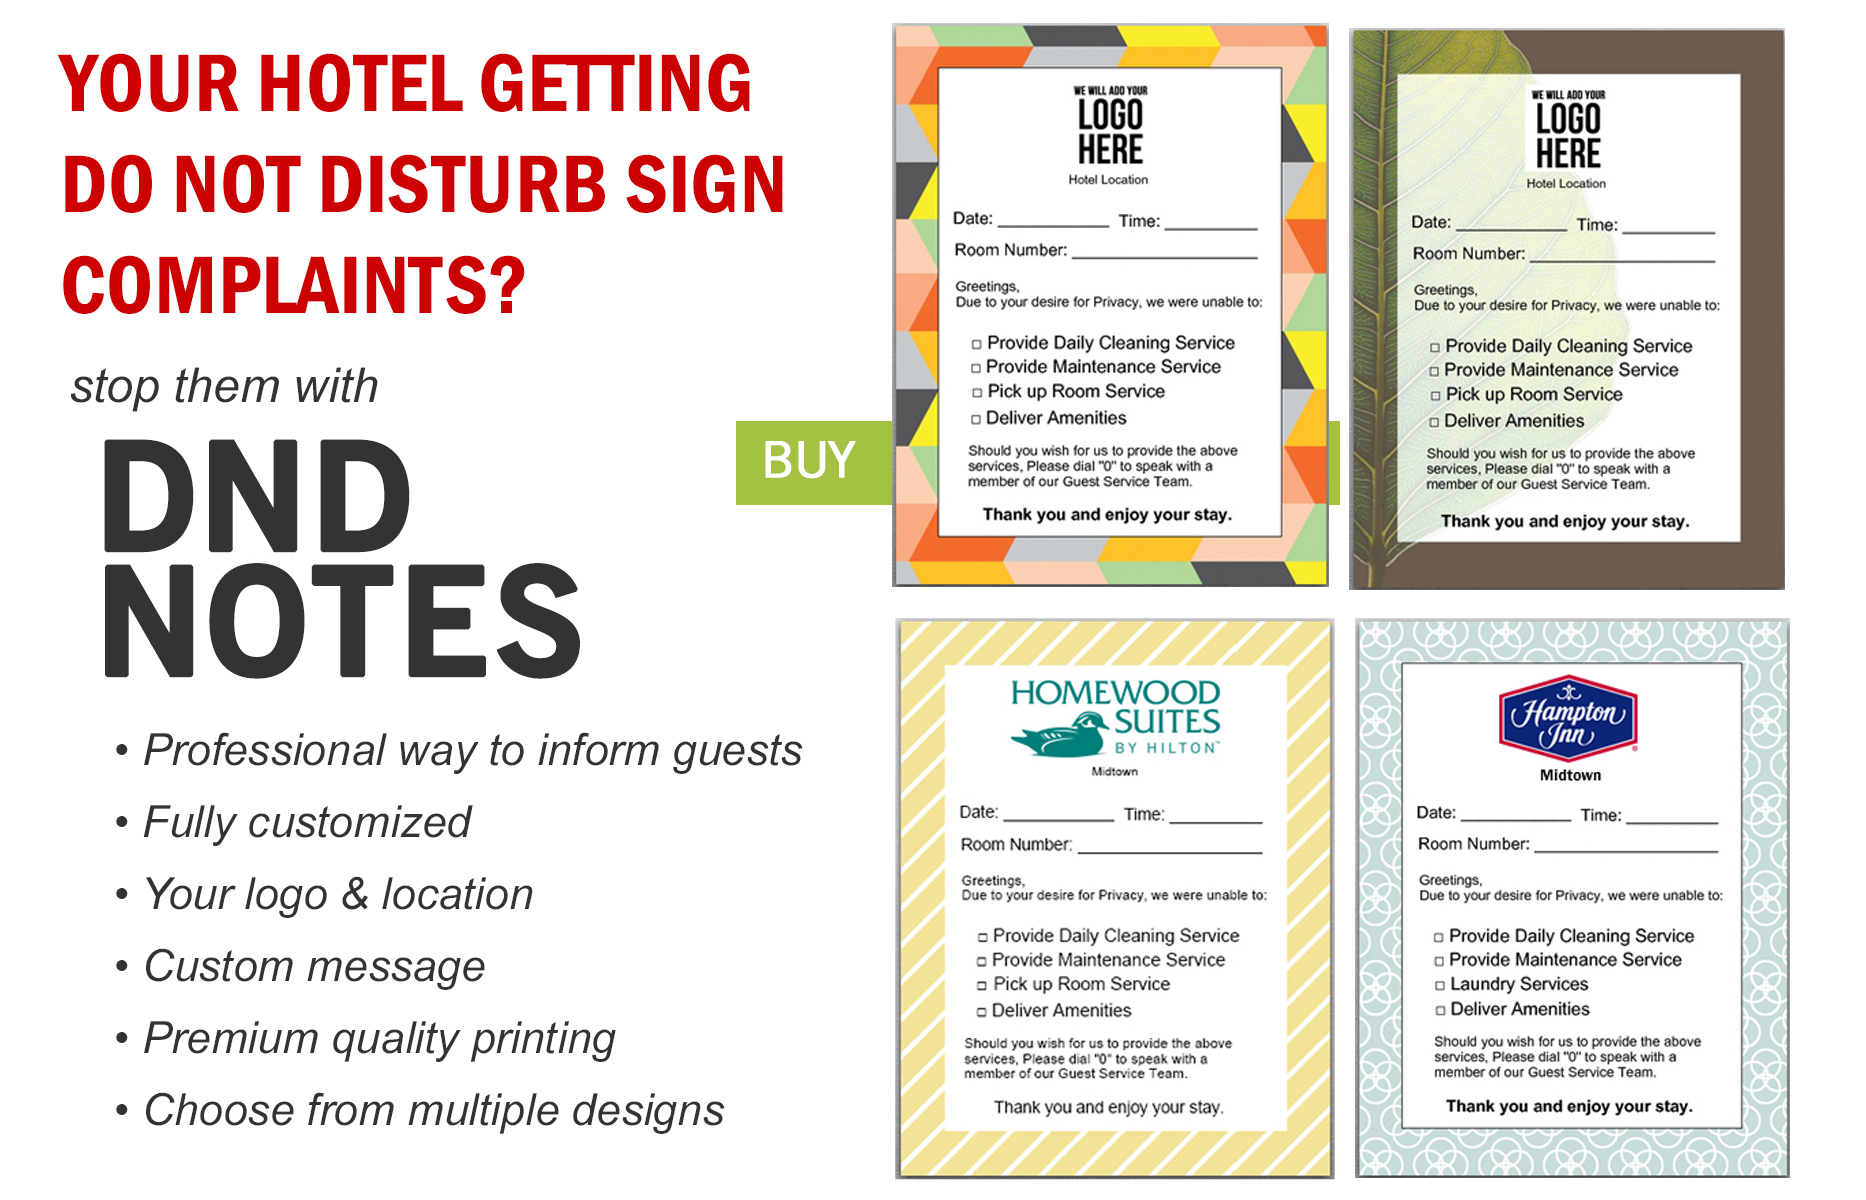 DND Notes to Stop Guest Complaints from Do Not Distrub Signs